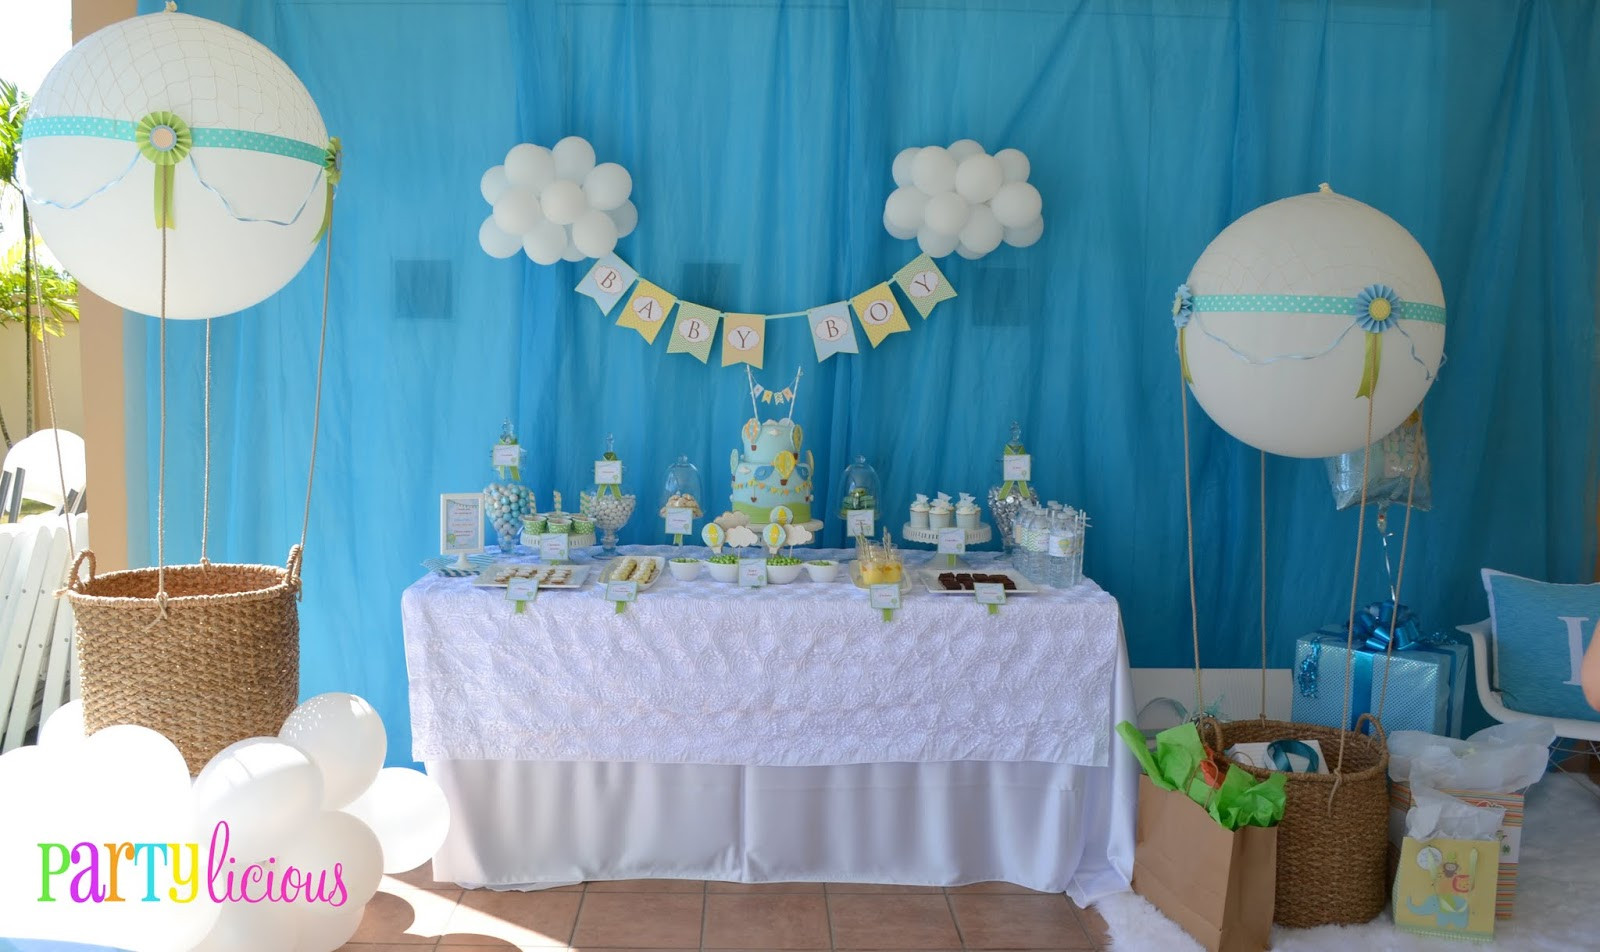 Ideas De Decoracion Para Baby Shower
 Partylicious Events PR Up Up and Away Baby Shower